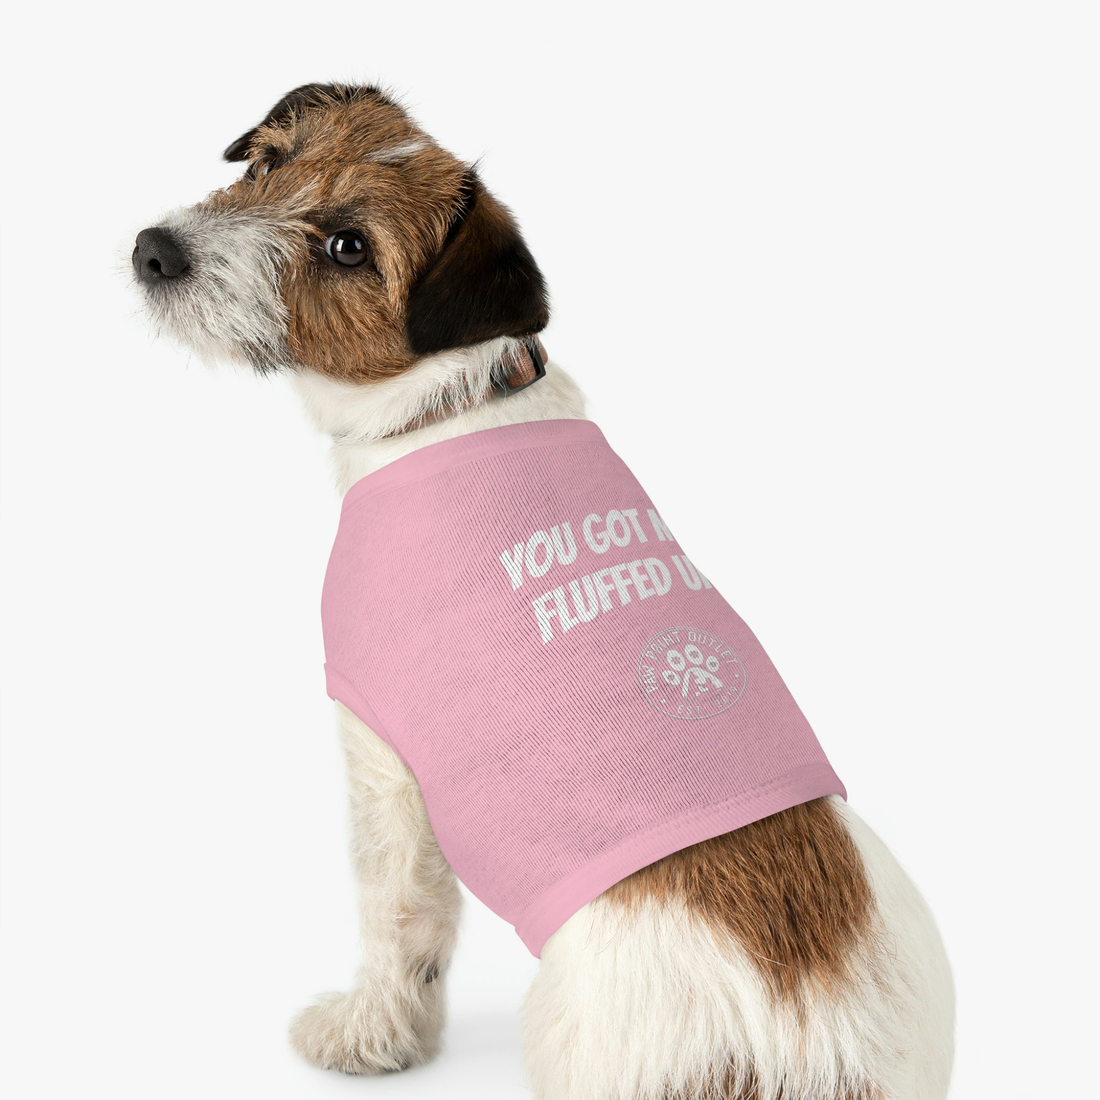 Dog Lover Apparel & Gifts